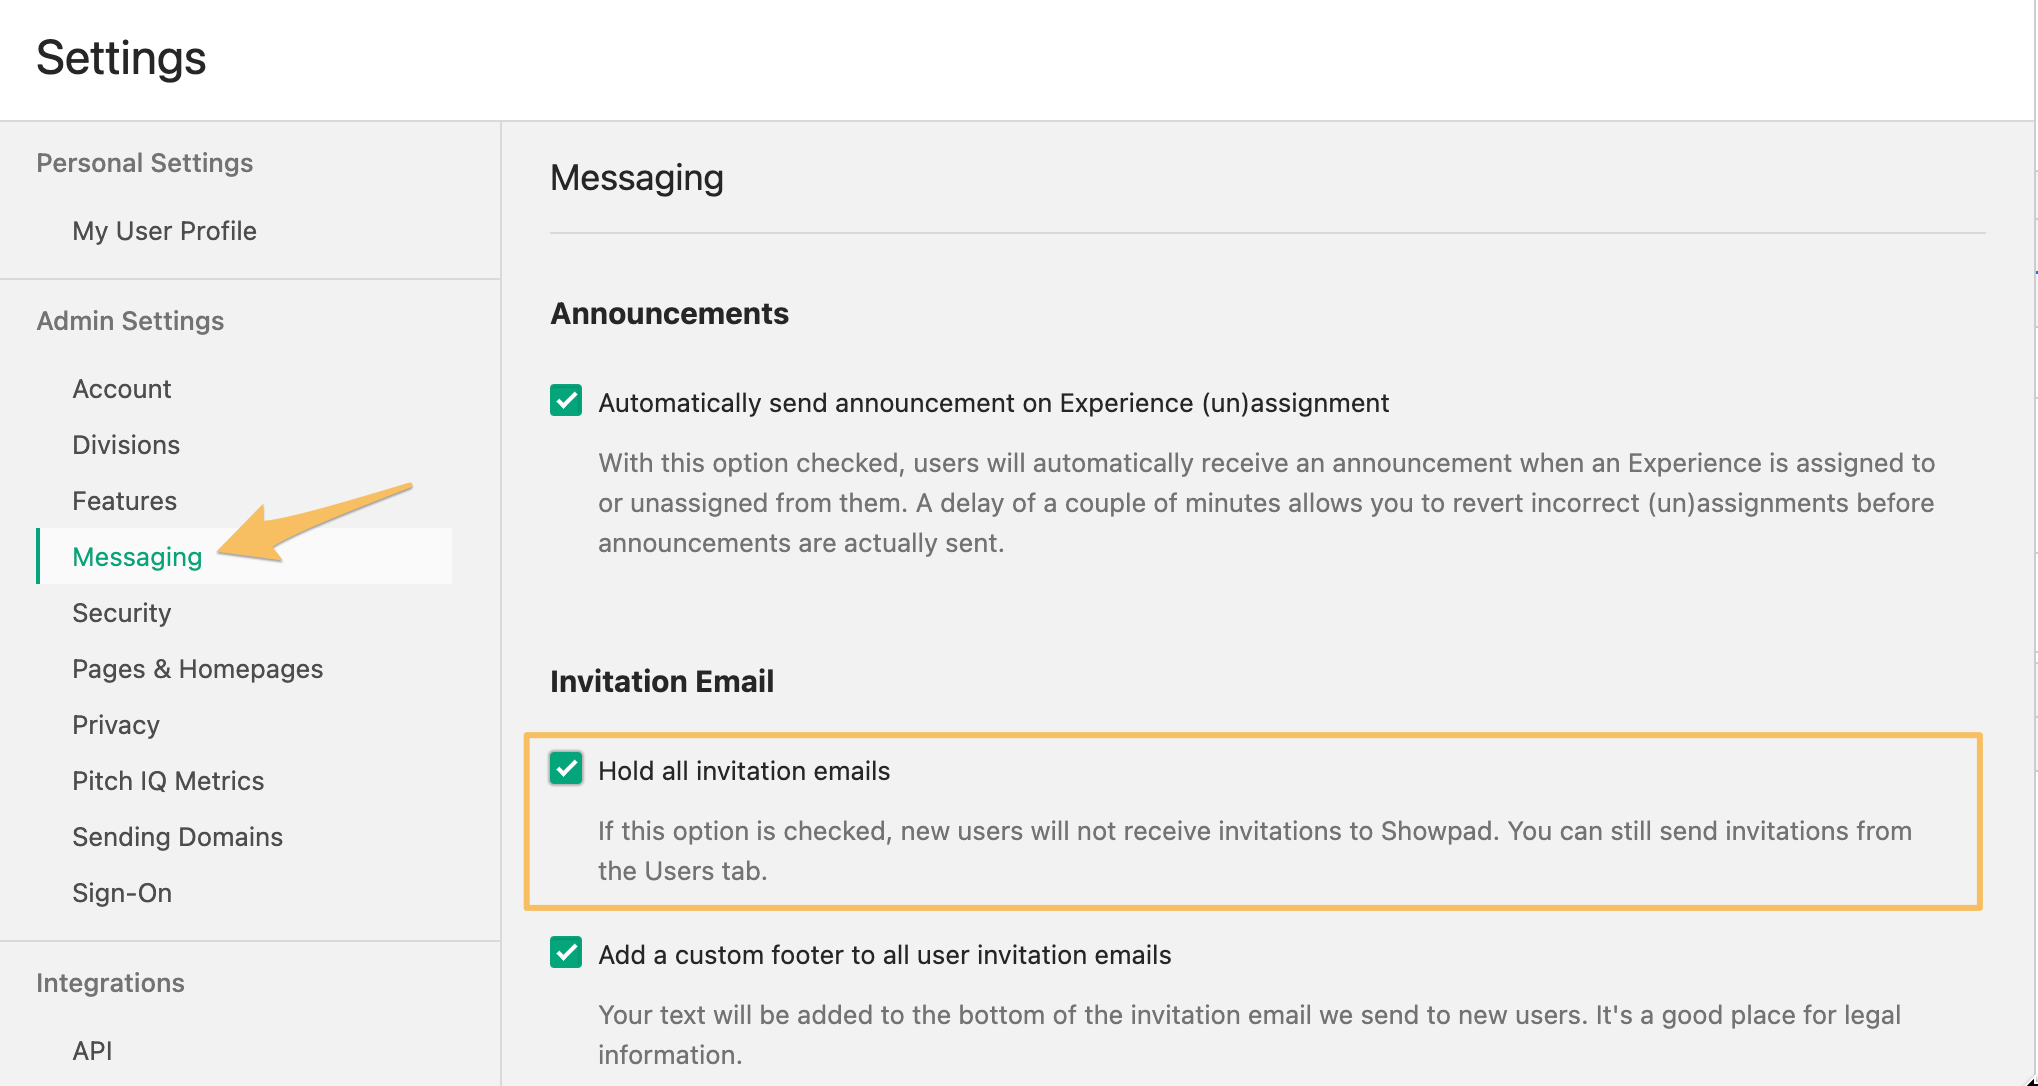 Settings_-_Messaging_-_Invitation_Email.png